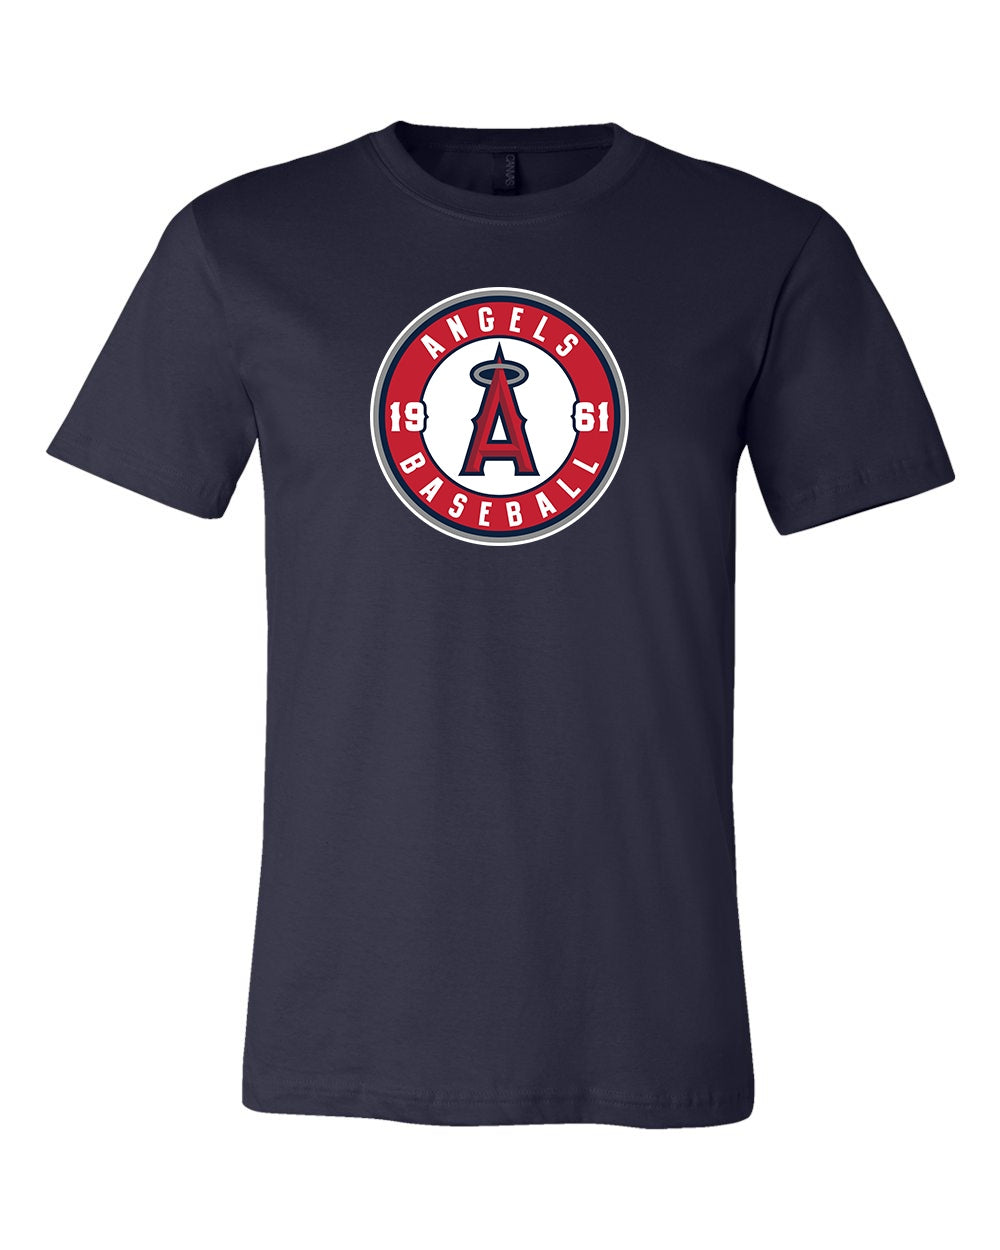 Los Angeles Angels T-Shirts in Los Angeles Angels Team Shop 